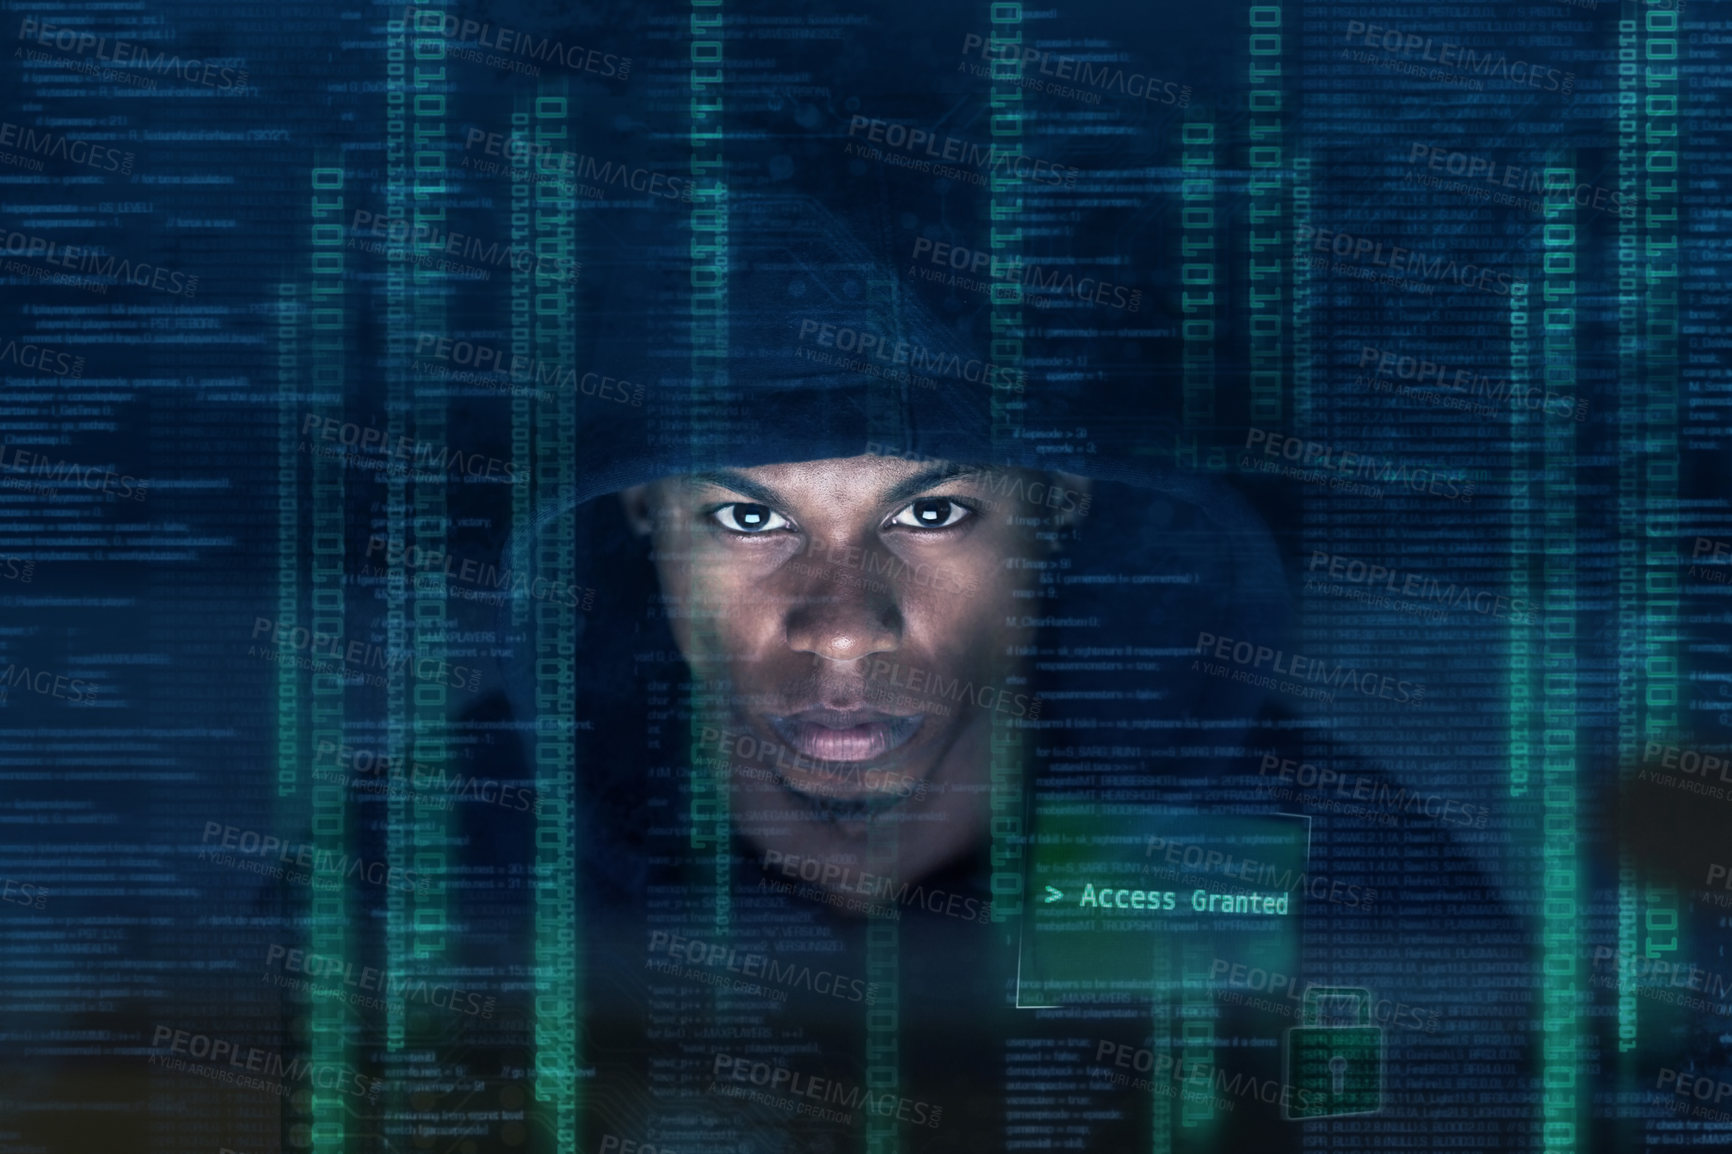 Buy stock photo Cropped portrait of a young man hacking into a secure computer network